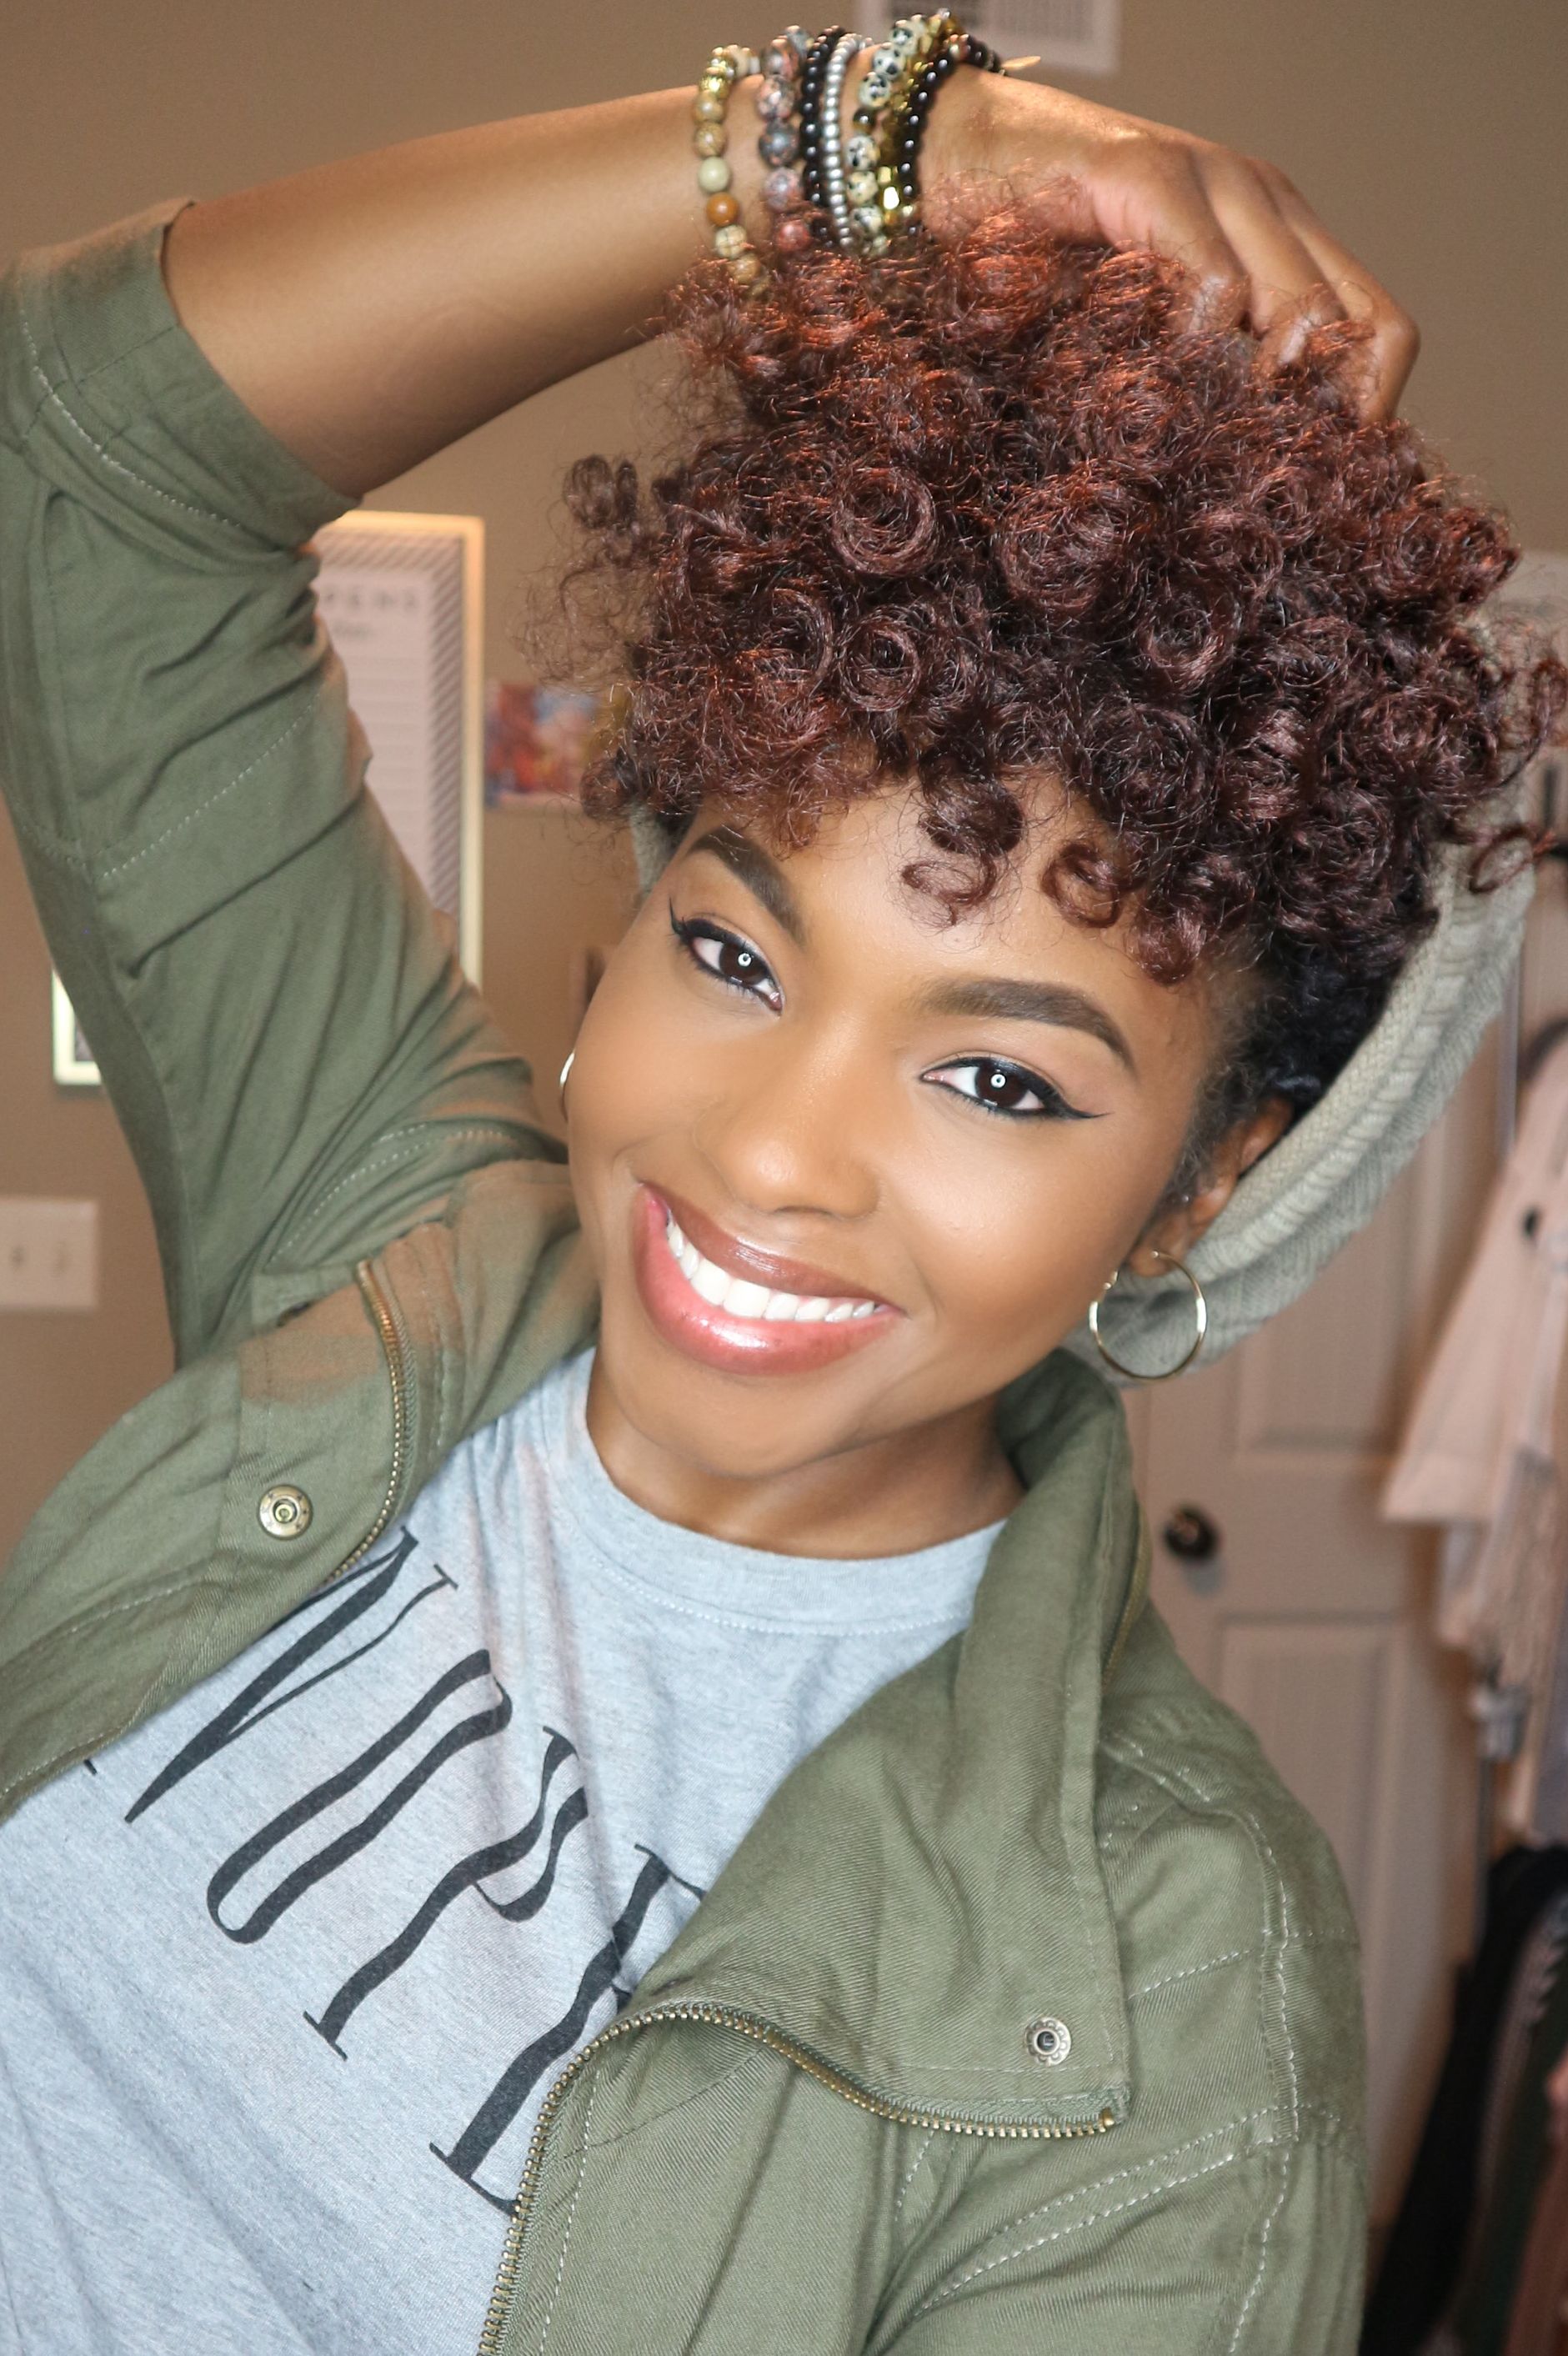 14 Best Crochet Hairstyles 2020 Pictures Of Curly Crochet Hair